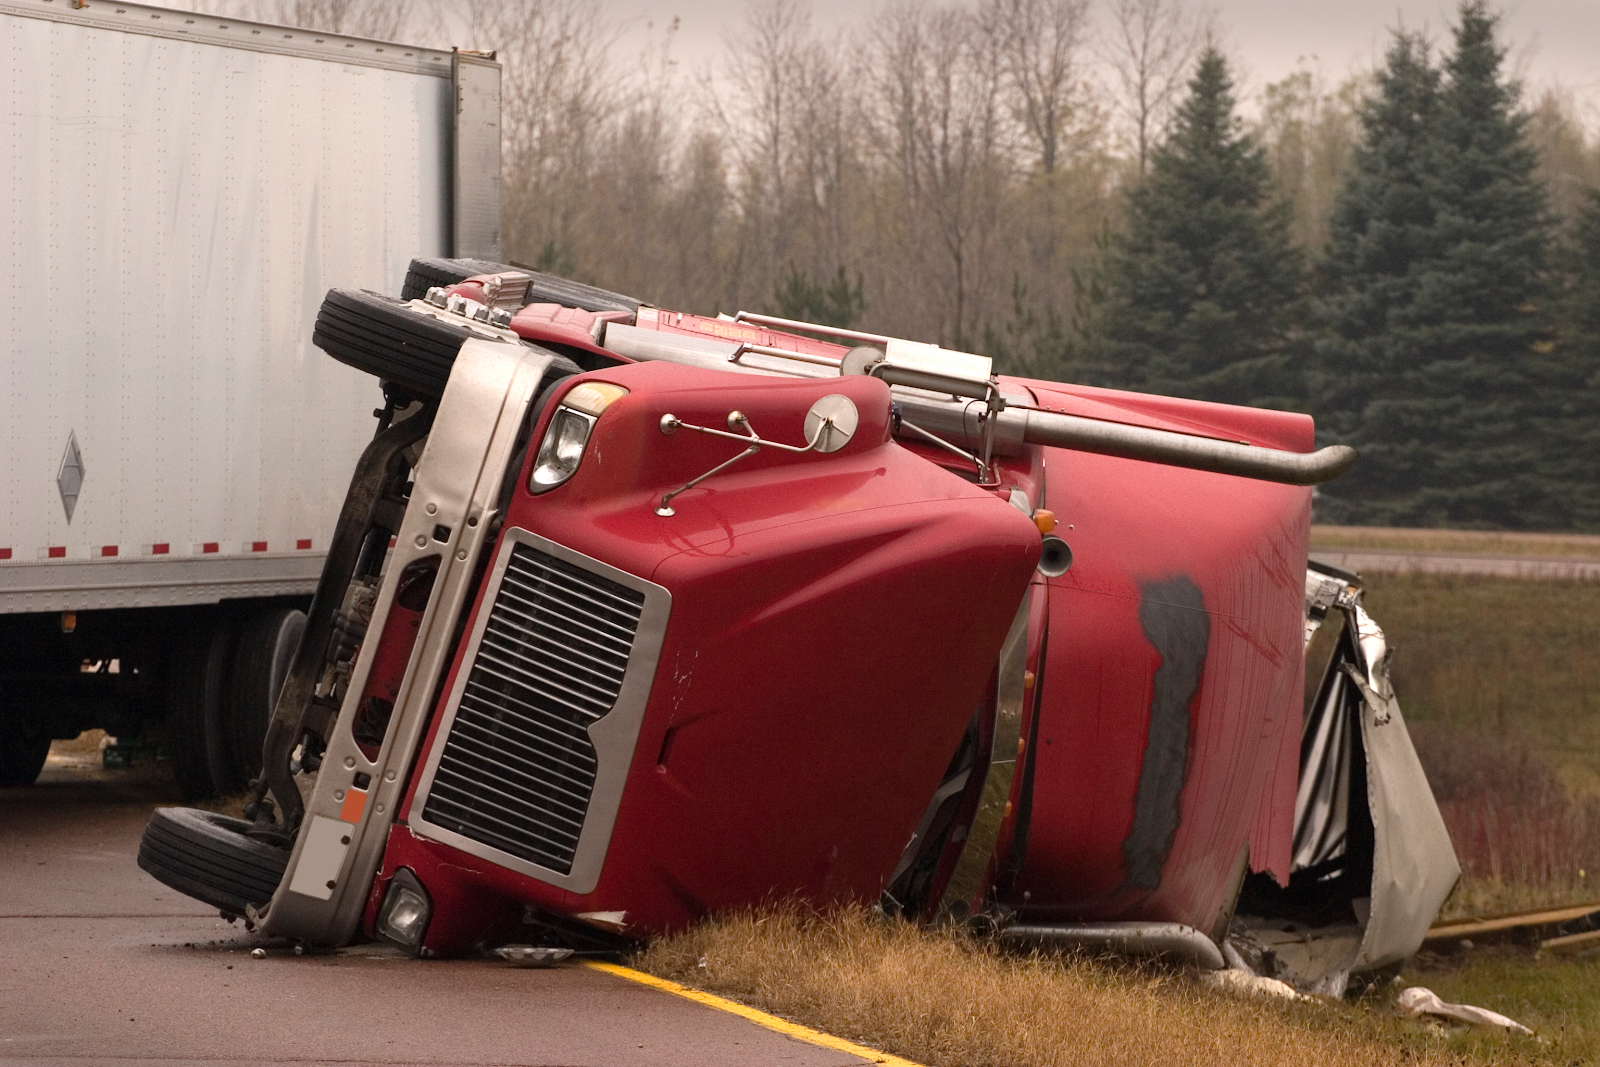 truck accident injuries, truck accident scene on the road